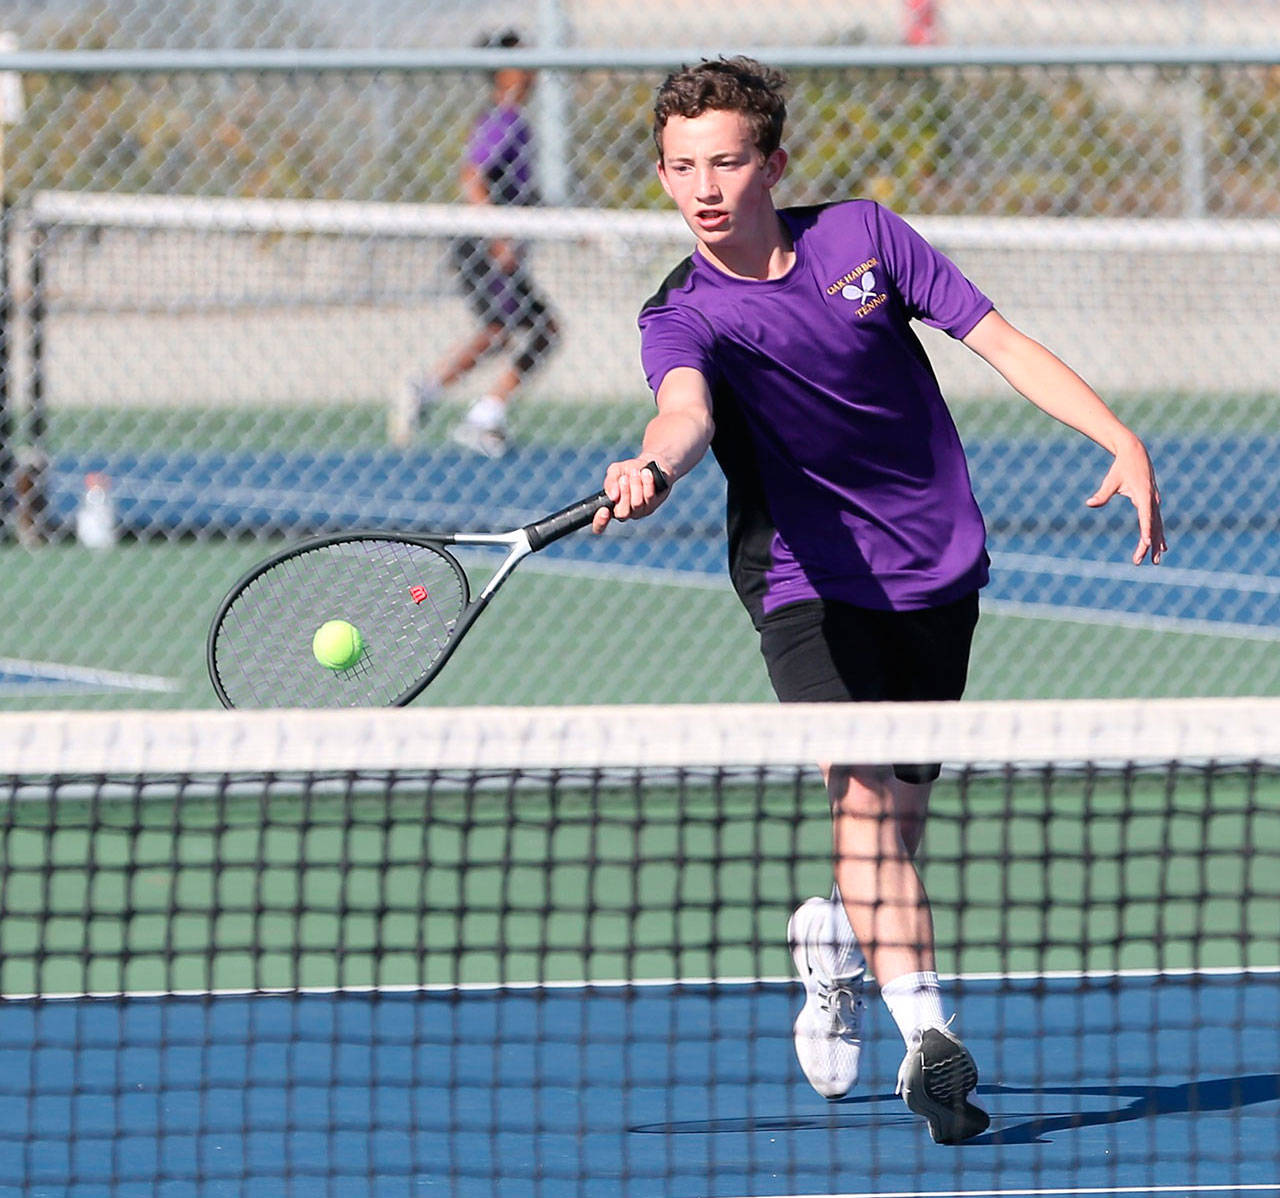 Nathaniel Thompson, who played No. 1 singles for Oak Harbor in 2017, returns to lead the Wildcats this season. (Photo by John Fisken)